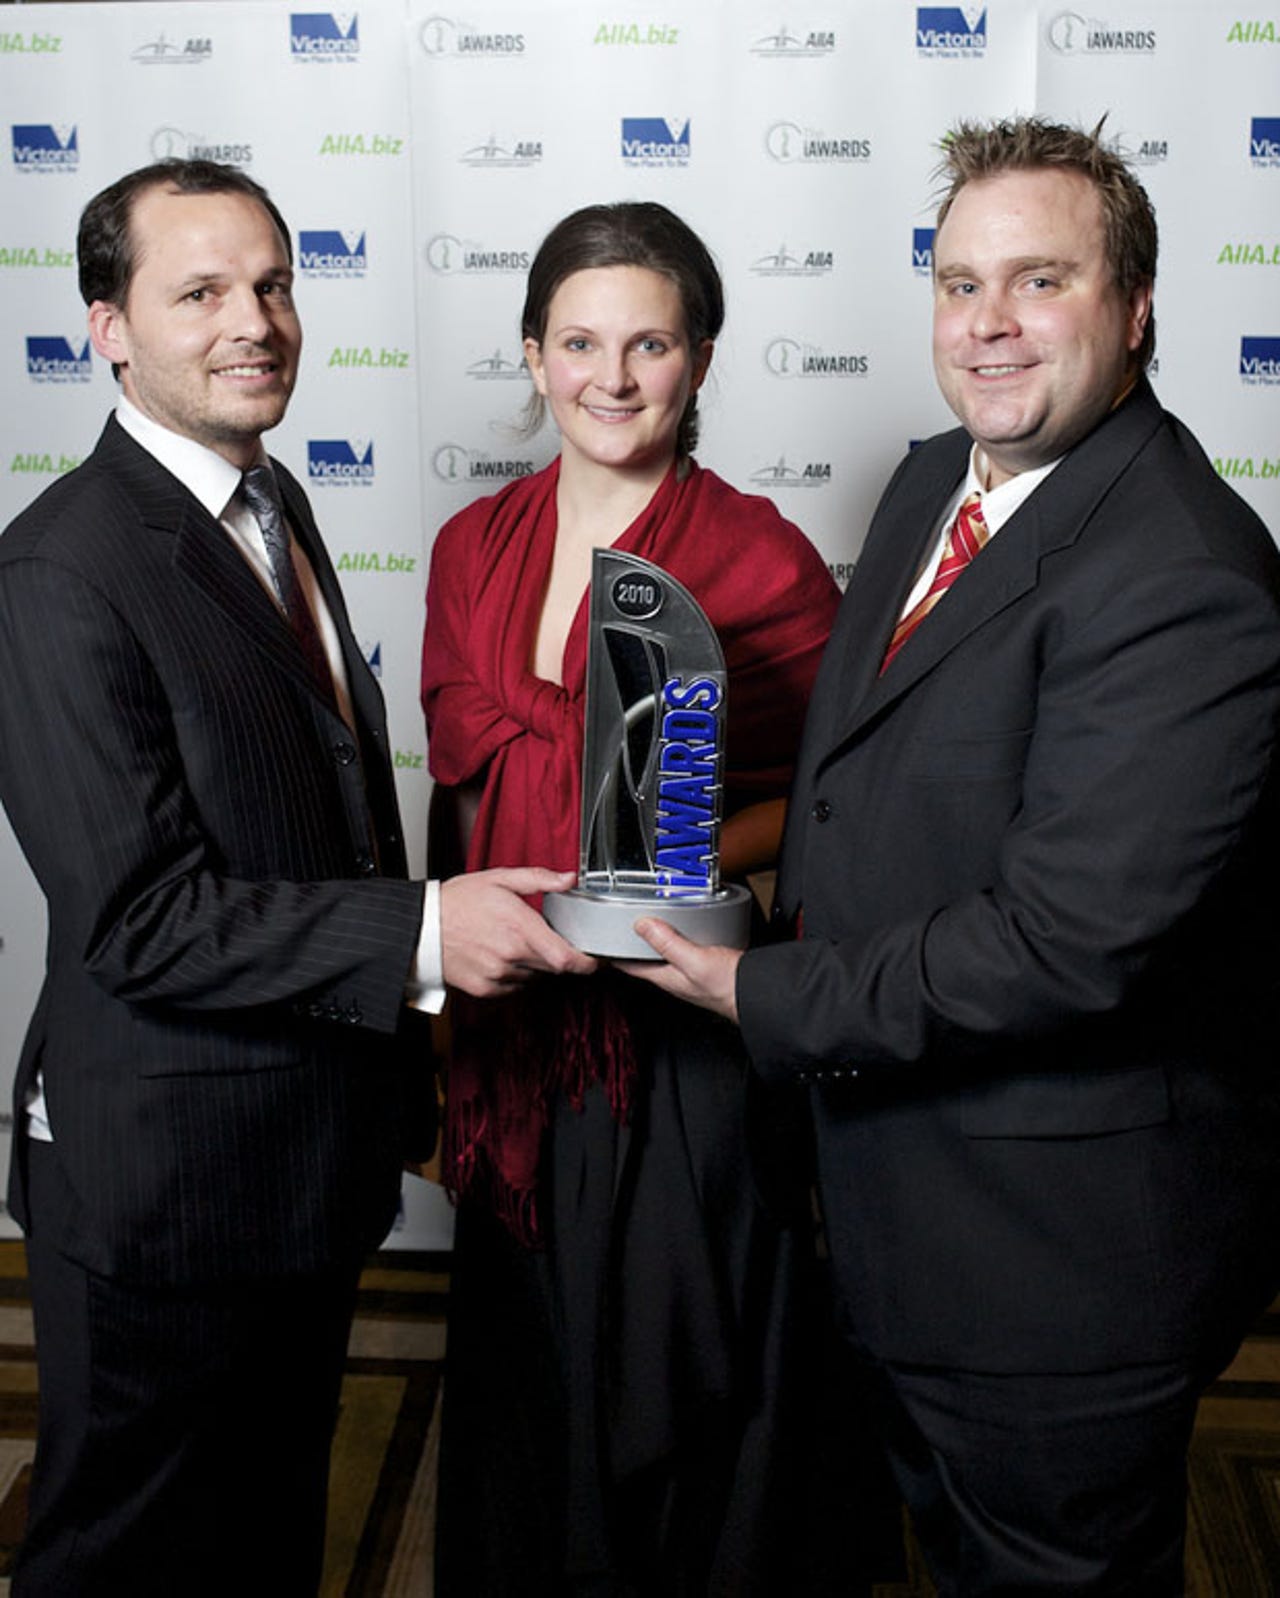 iawards-winners-are-grinners-photos10.jpg